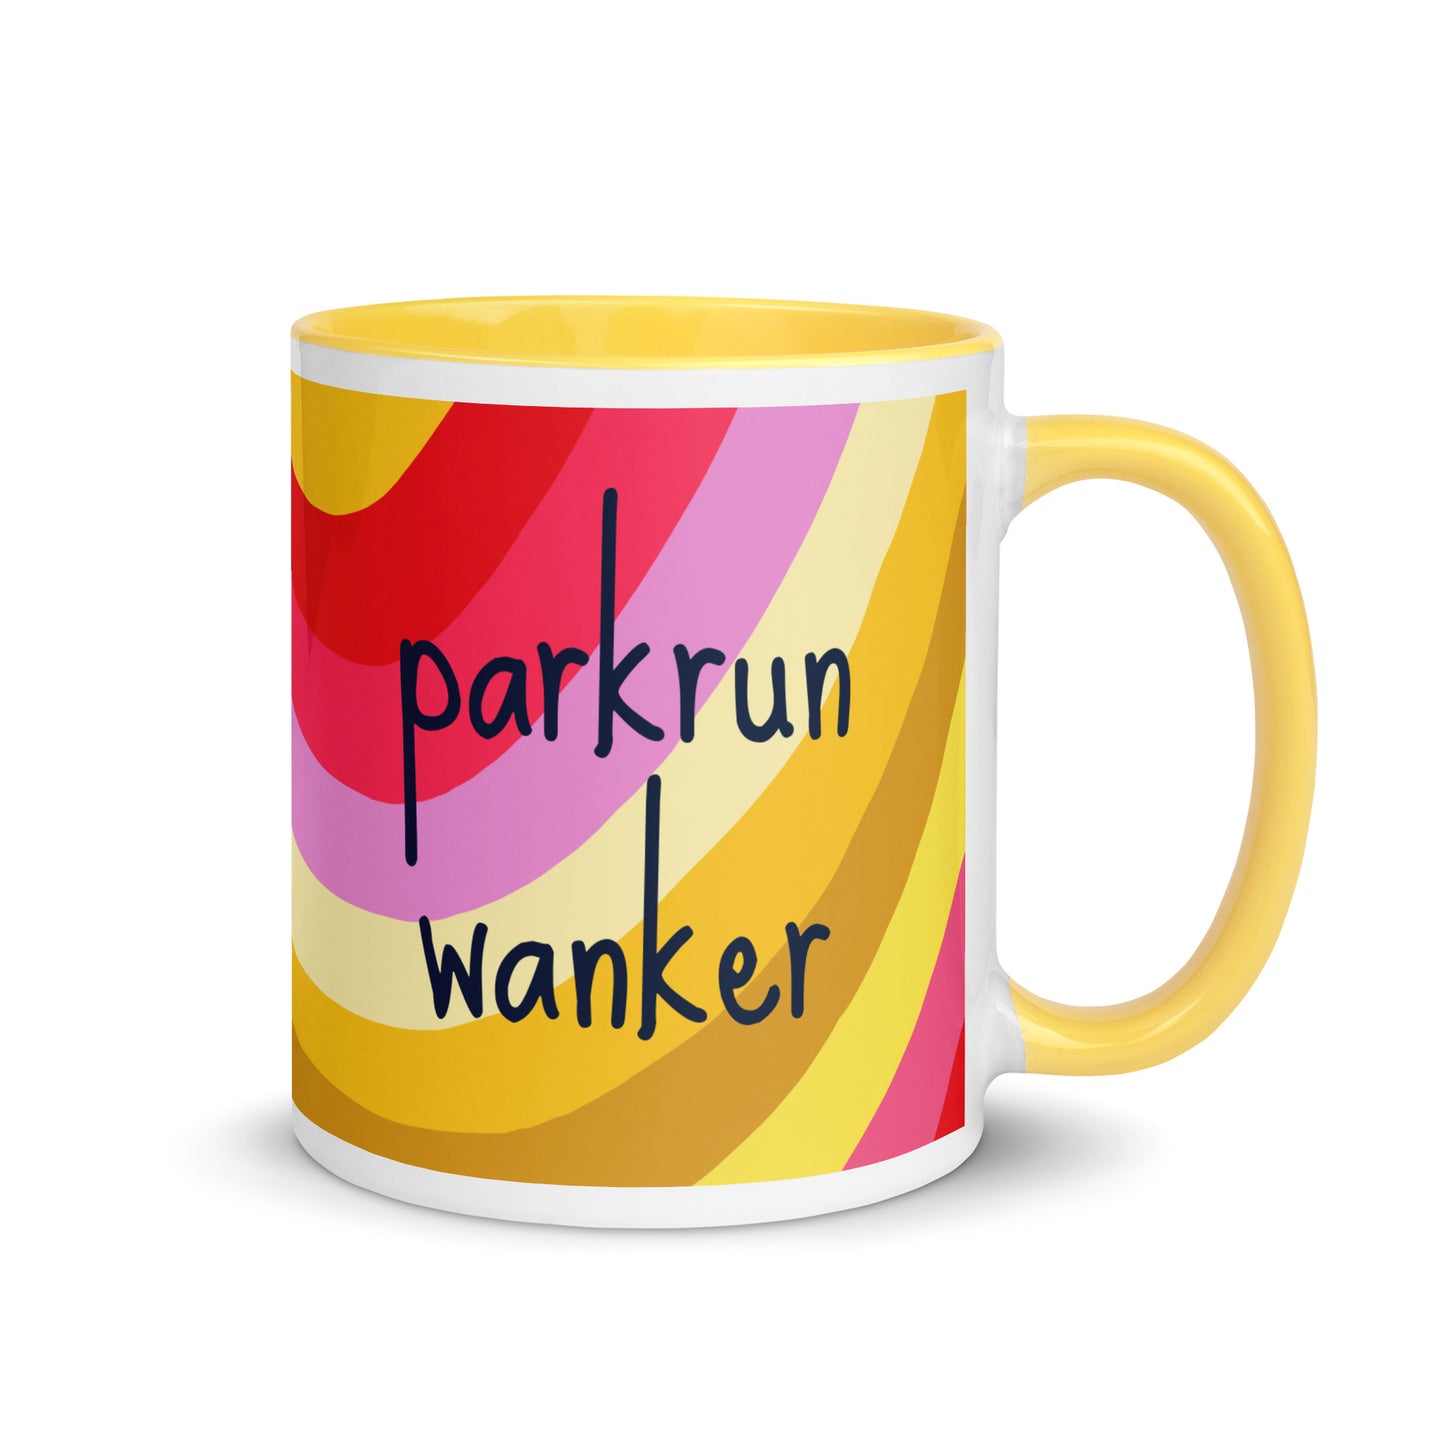 mug with a yellow rim and handle, with a colourful rainbow design and the words parkrun wanker across the front